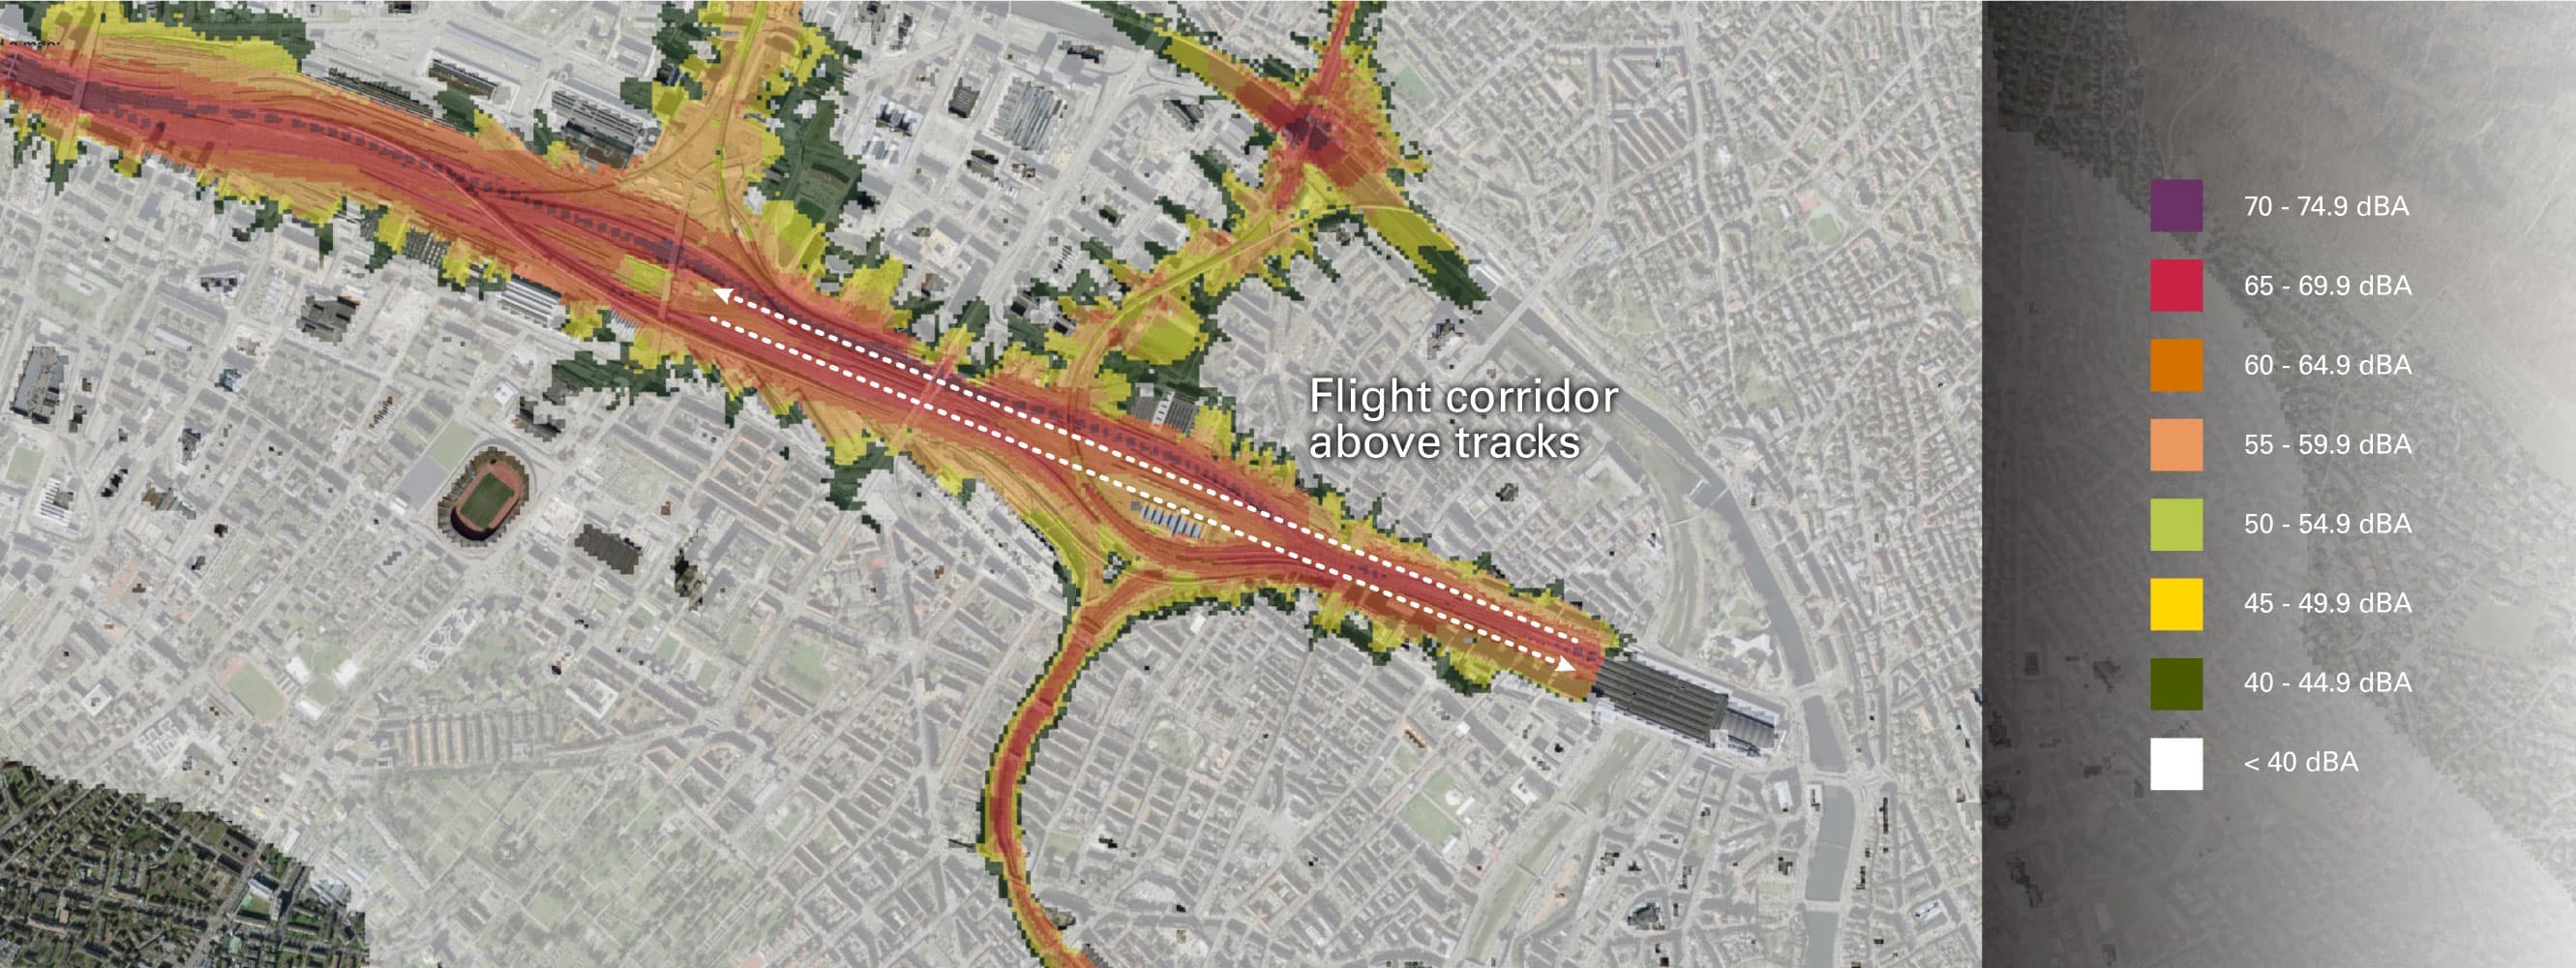 Using existing transport corridors such as train tracks will minimize our noise footprint